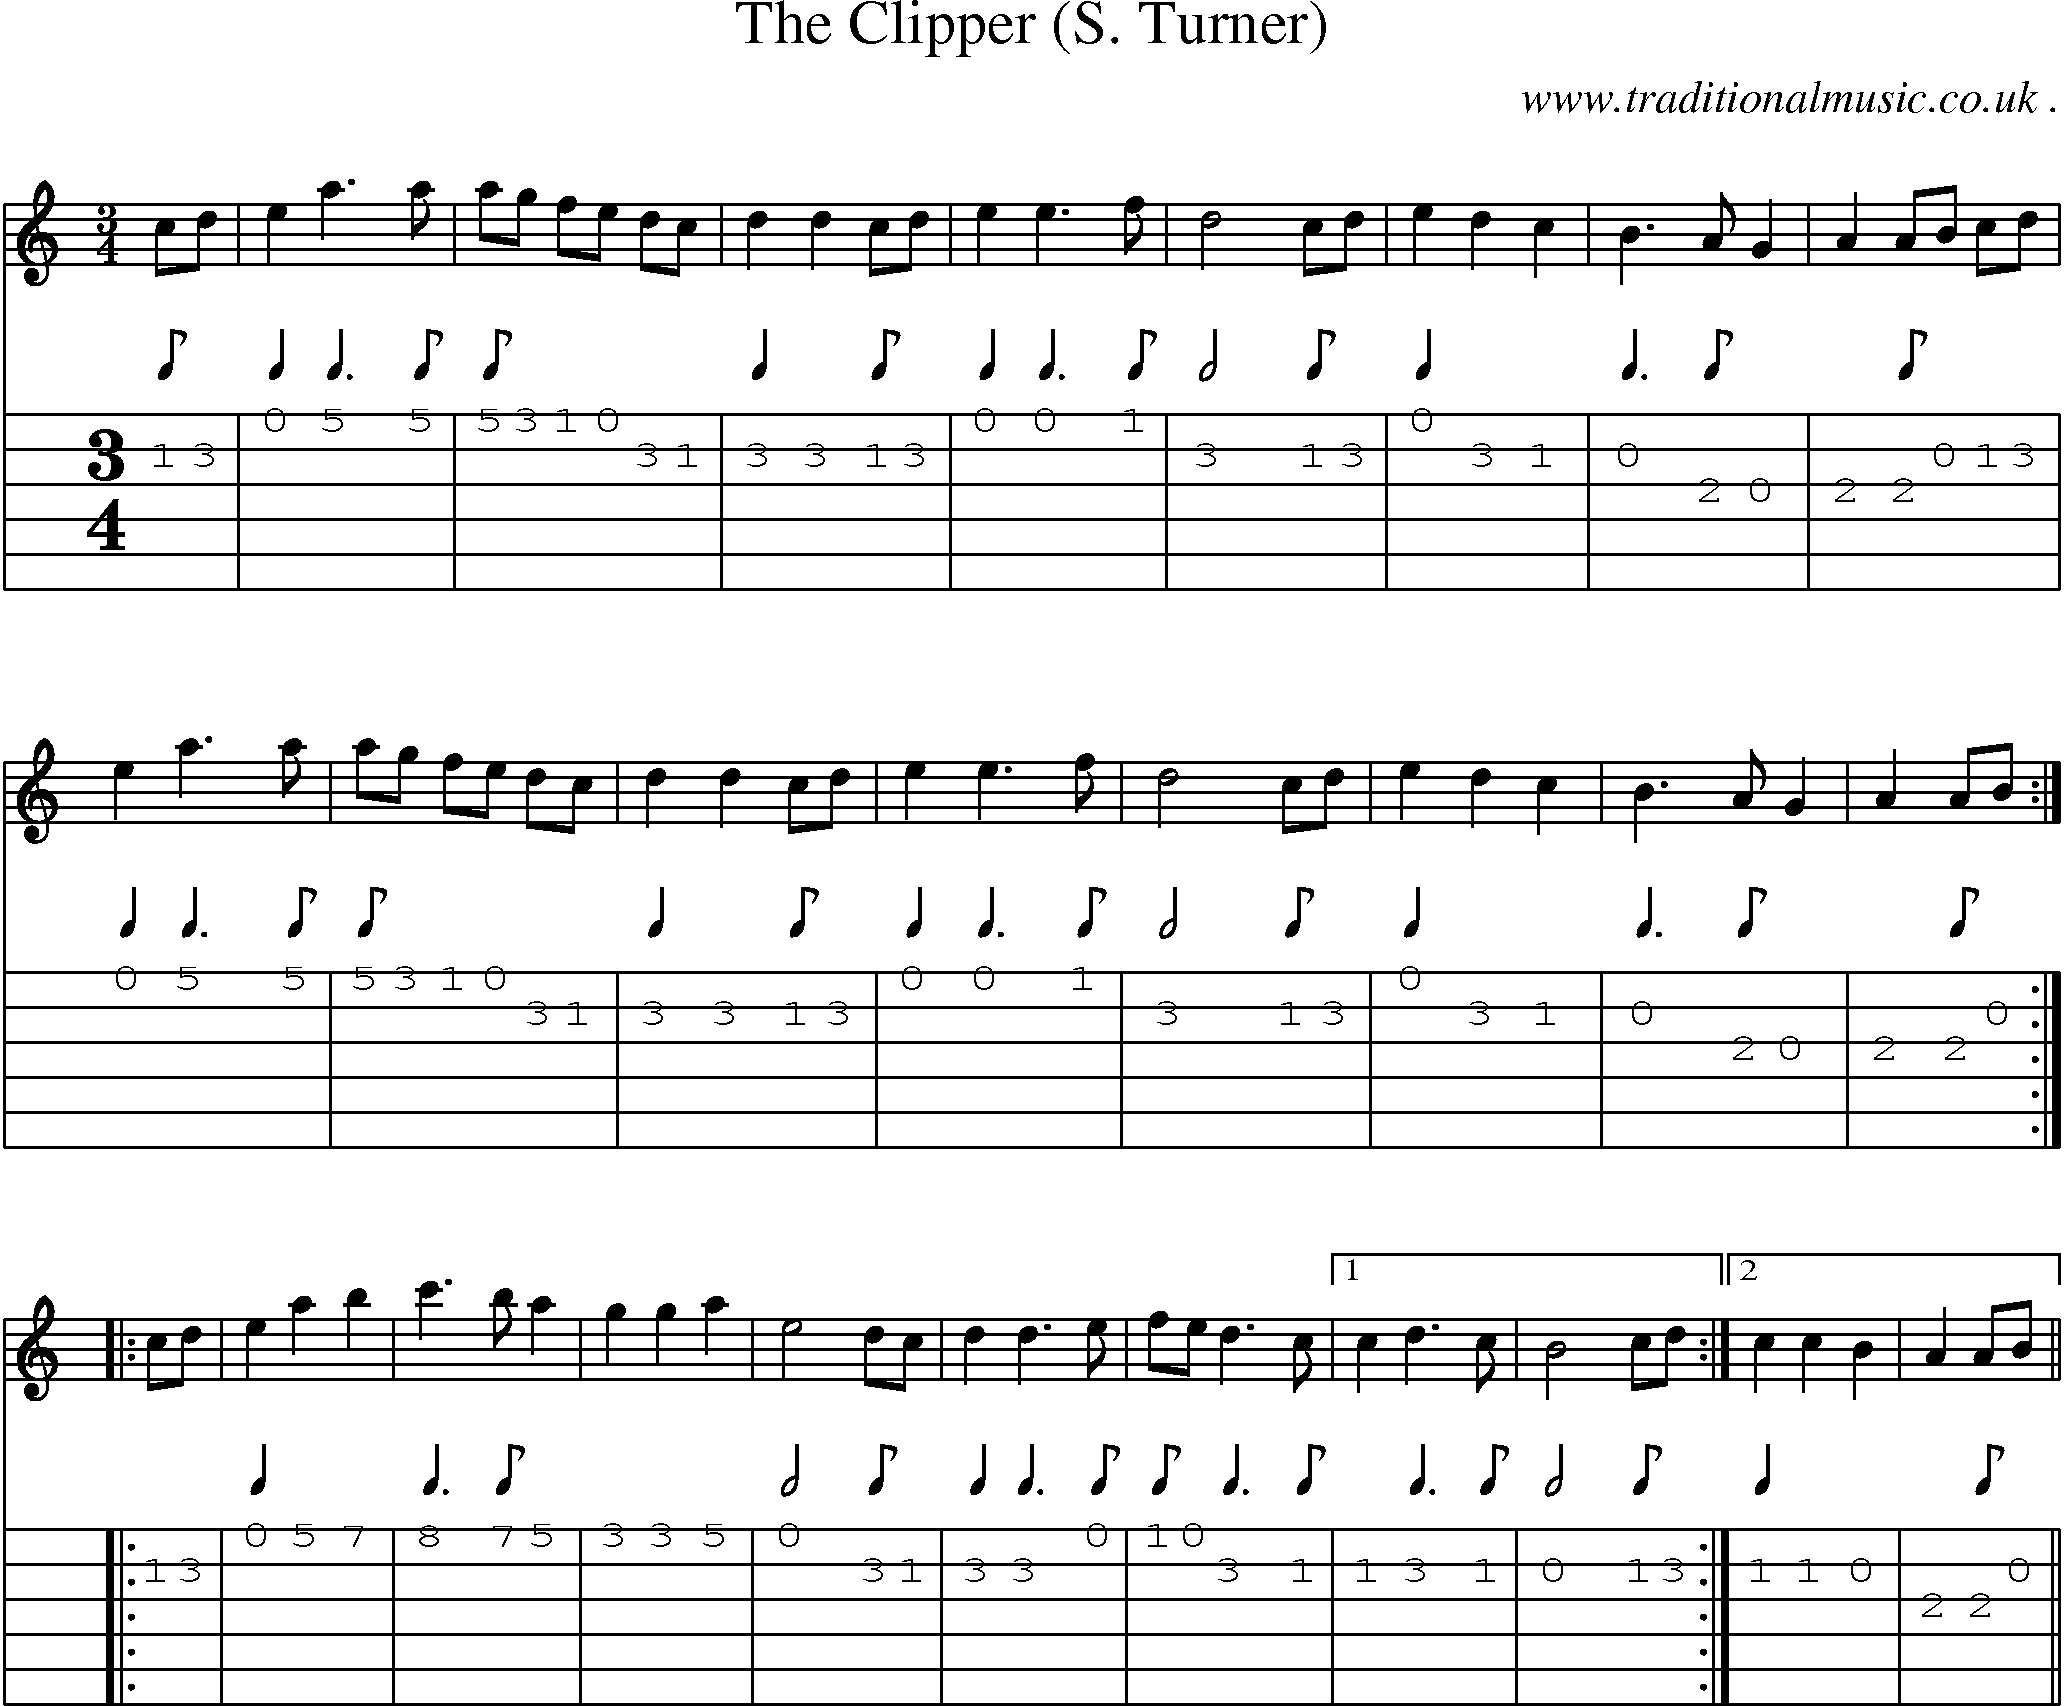 Sheet-Music and Guitar Tabs for The Clipper (s Turner)